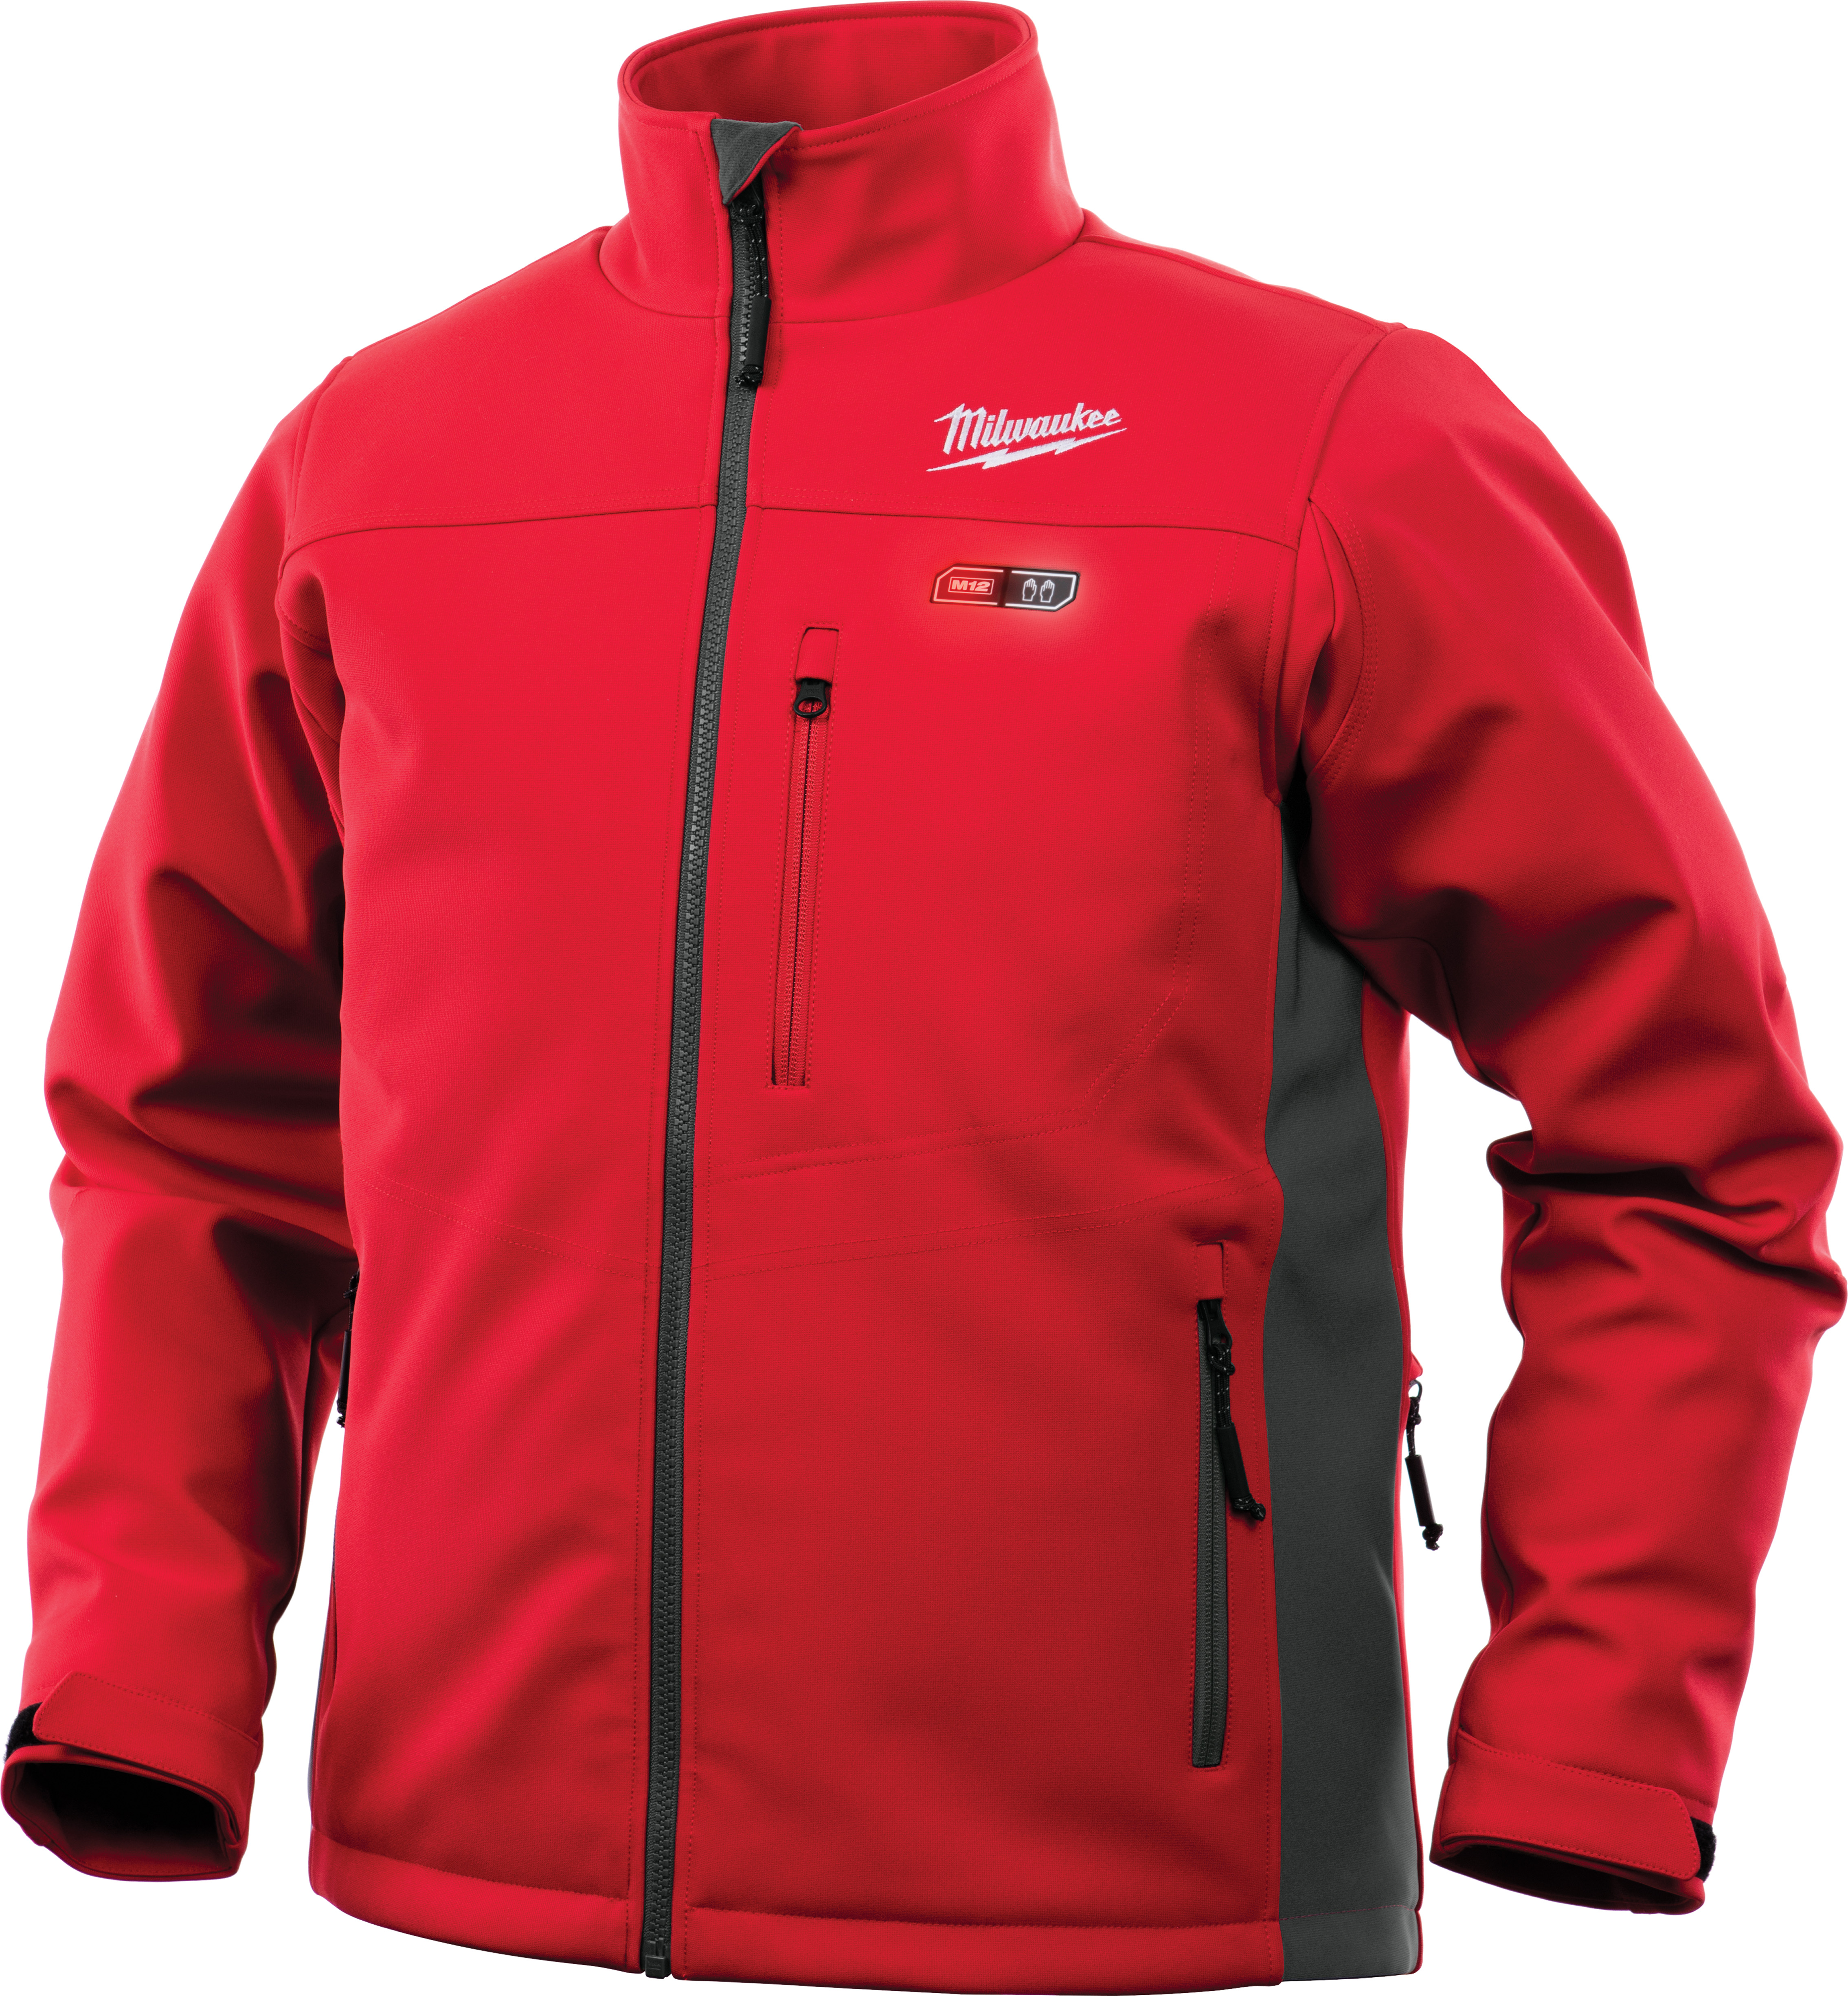 Powered by M12™ REDLITHIUM™ battery technology, Milwaukee® M12™ heated ToughShell™ jackets use carbon fiber heating elements to create and distribute heat to the chest, back, and front hand pockets. A one-touch LED controller allows users to select from three heat settings, delivering ideal heat for any environment. The new quick-heat function allows users to feel heat 3X faster than previous jackets and market competitors. For use in abrasive environments, ToughShell™ stretch polyester delivers 5X longer life than previous QuietShell jackets, and provides wind and water resistance to survive the elements.